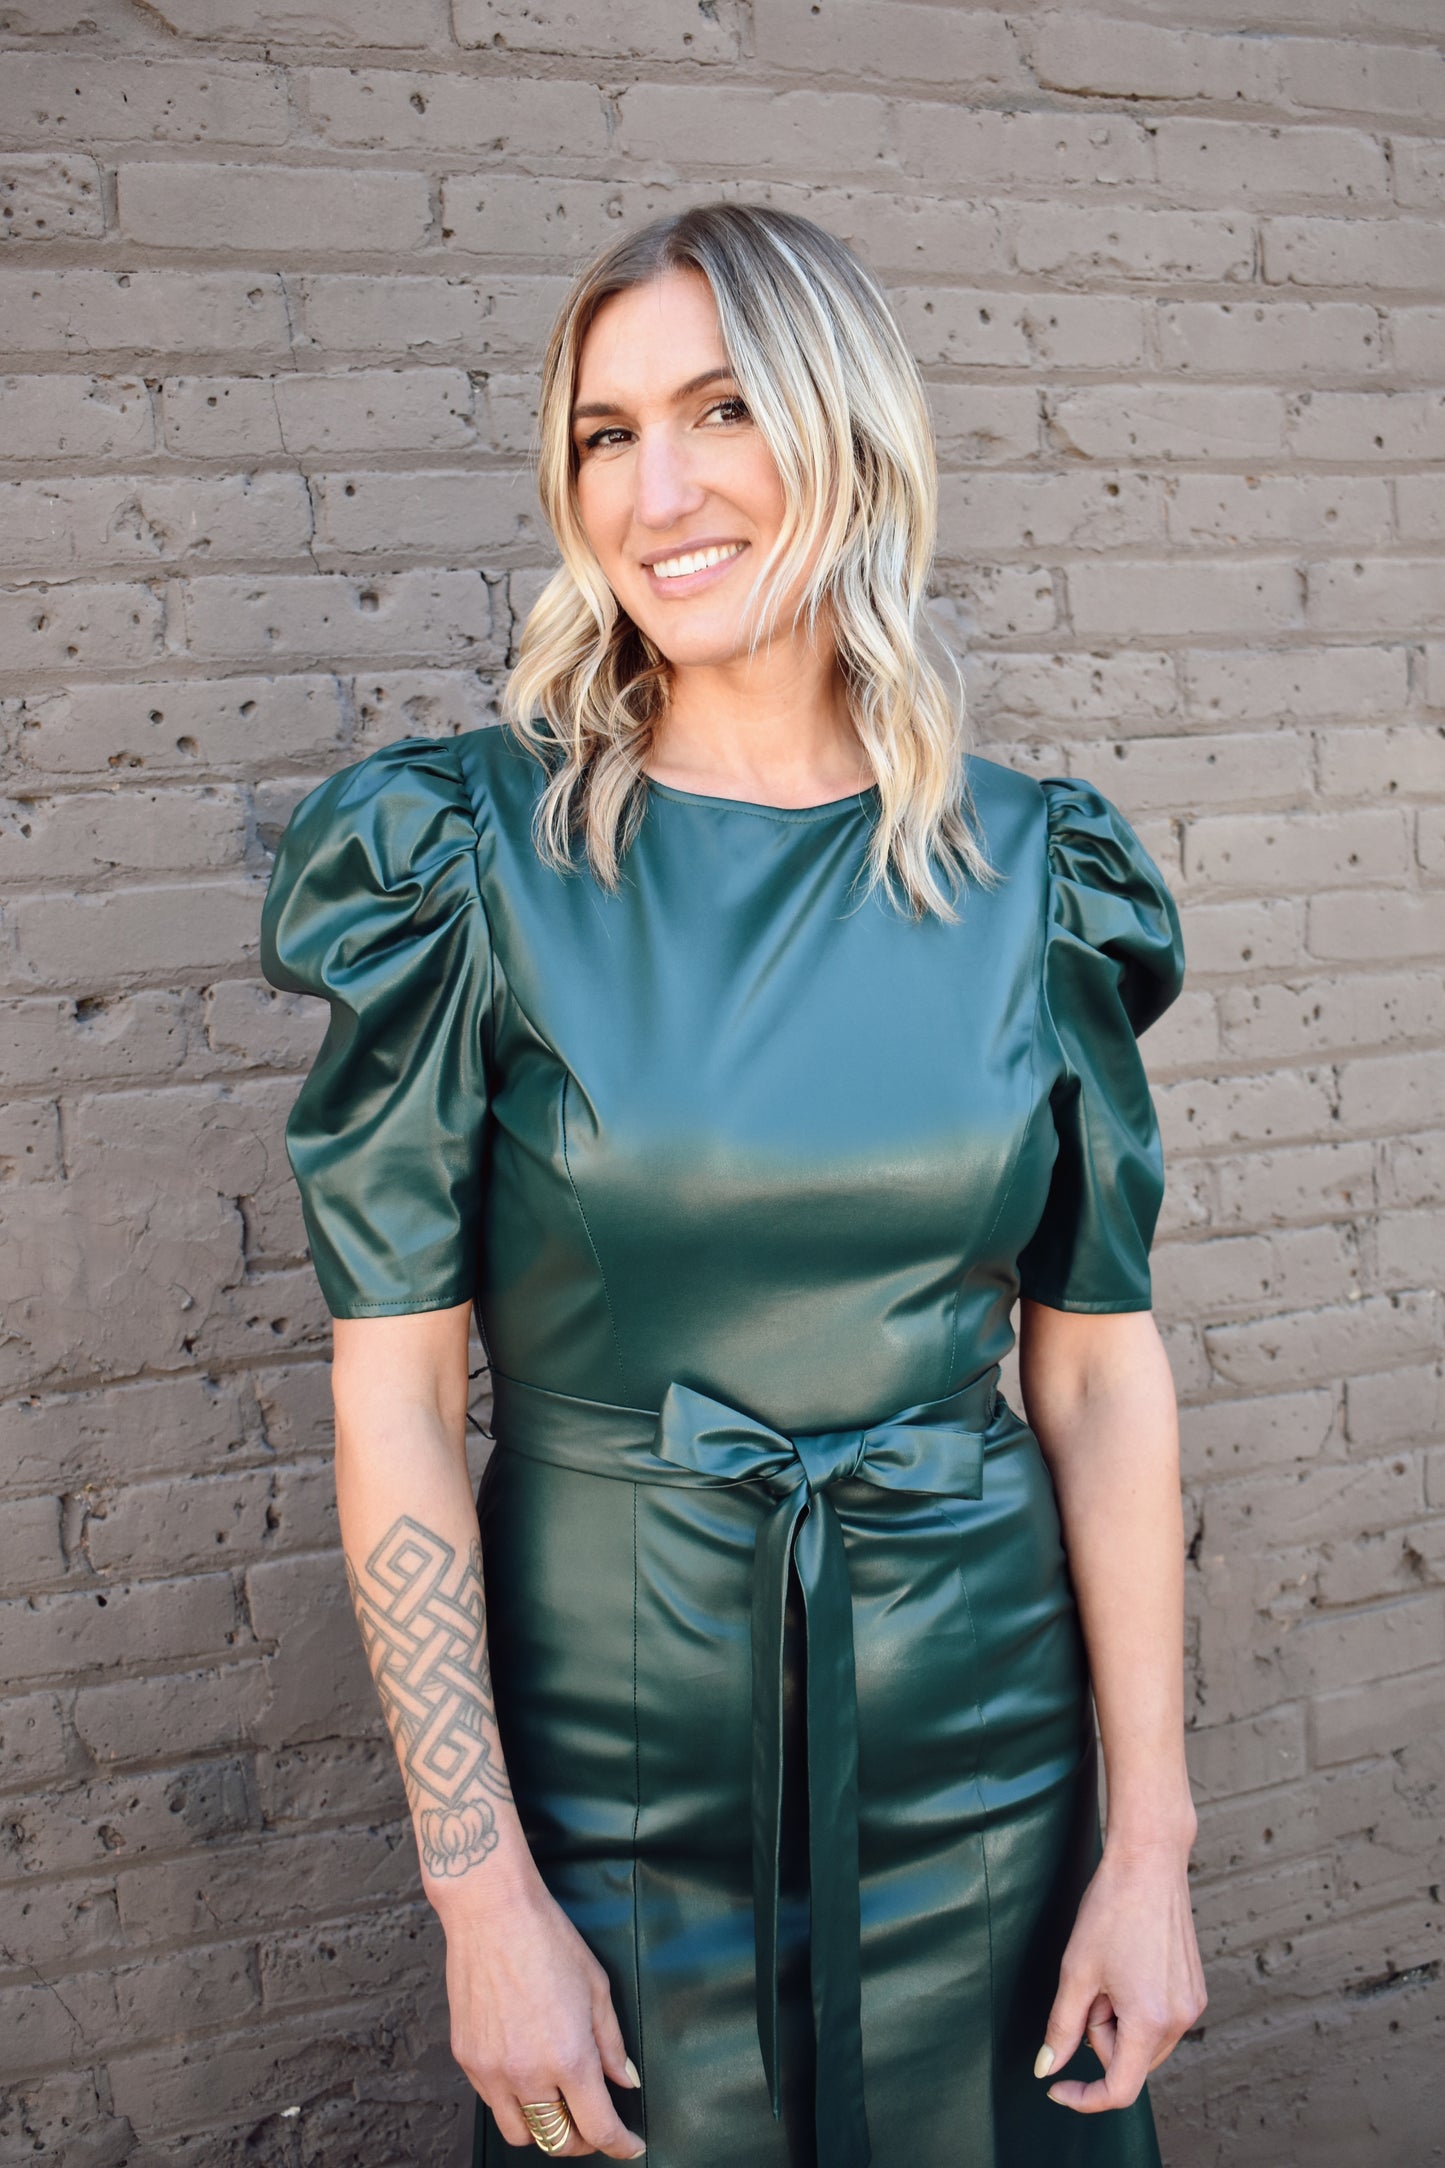 bold dark green faux leather midi dress fitted with slight flare at bottom. Short puff sleeves, crew neck, self tie waist, zipper enclosure